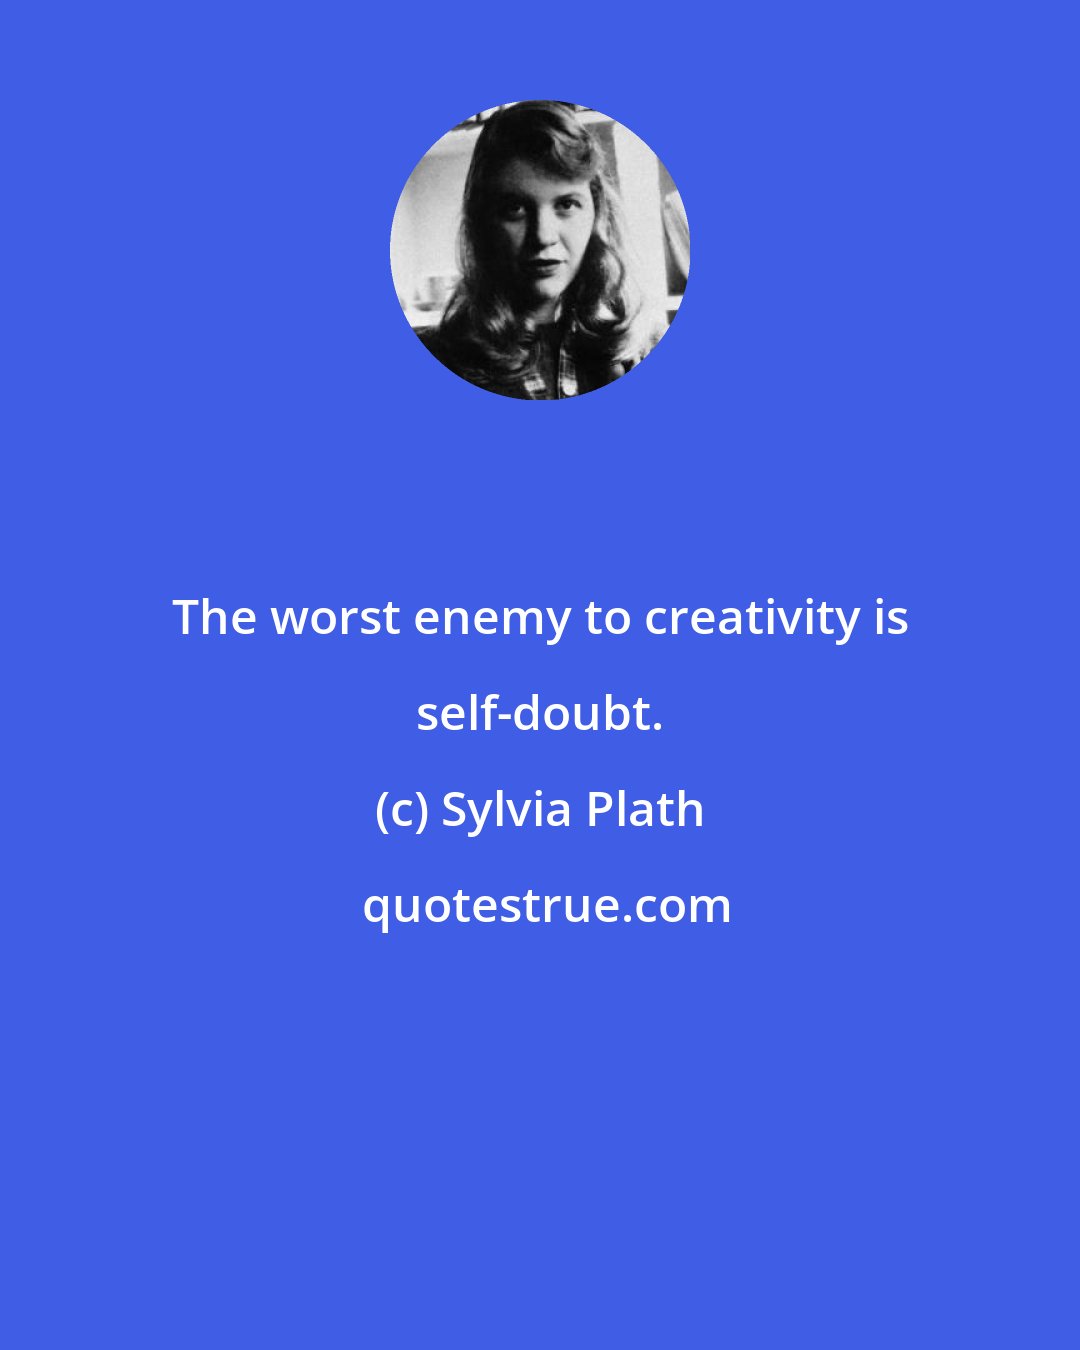 Sylvia Plath: The worst enemy to creativity is self-doubt.